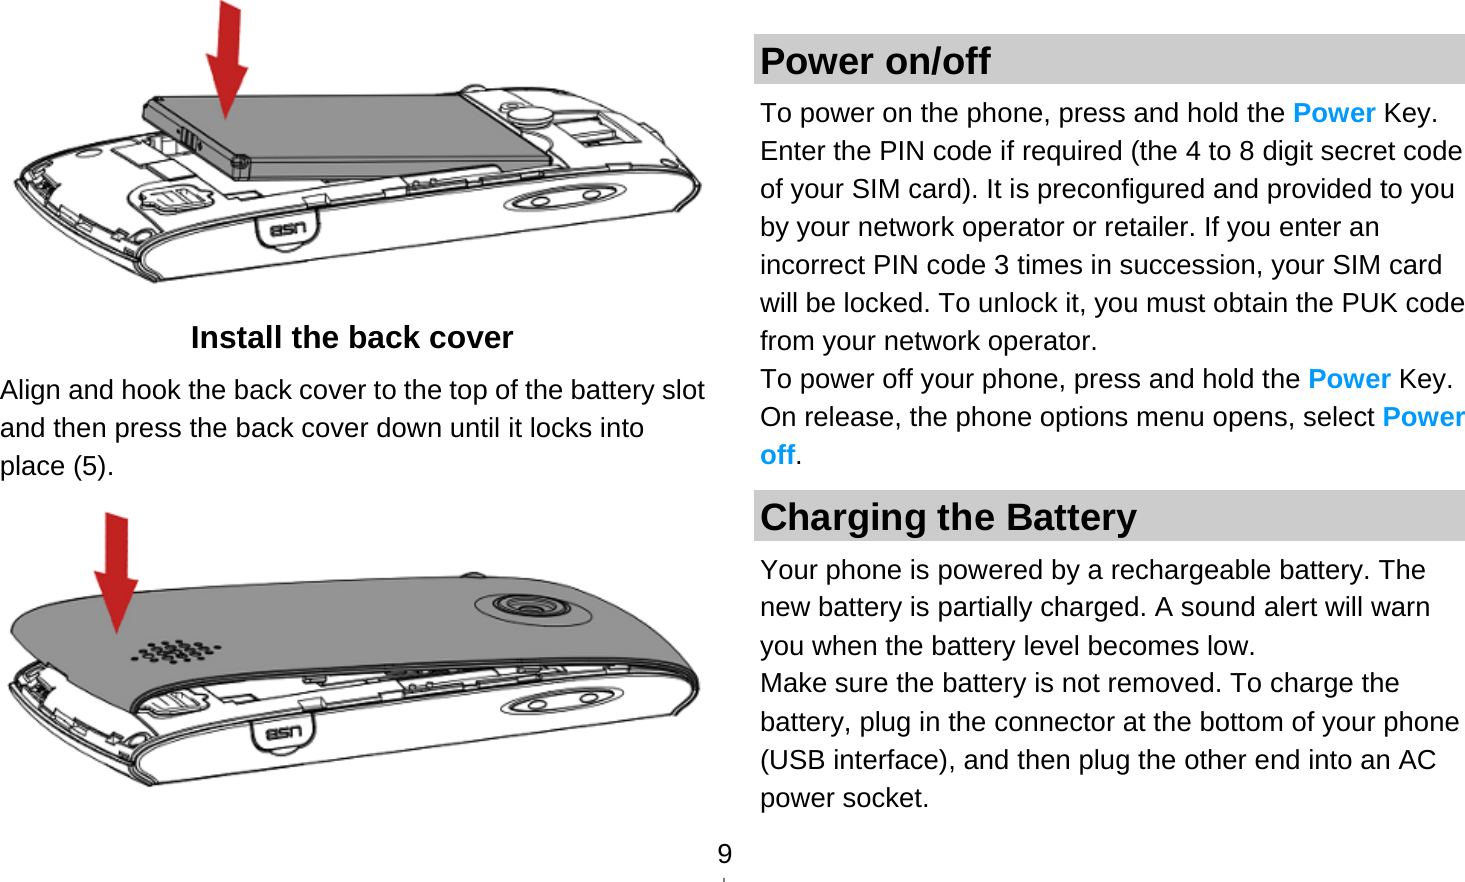   9 Install the back cover Align and hook the back cover to the top of the battery slot and then press the back cover down until it locks into place (5).   Power on/off To power on the phone, press and hold the Power Key. Enter the PIN code if required (the 4 to 8 digit secret code of your SIM card). It is preconfigured and provided to you by your network operator or retailer. If you enter an incorrect PIN code 3 times in succession, your SIM card will be locked. To unlock it, you must obtain the PUK code from your network operator. To power off your phone, press and hold the Power Key. On release, the phone options menu opens, select Power off. Charging the Battery Your phone is powered by a rechargeable battery. The new battery is partially charged. A sound alert will warn you when the battery level becomes low. Make sure the battery is not removed. To charge the battery, plug in the connector at the bottom of your phone (USB interface), and then plug the other end into an AC power socket. 